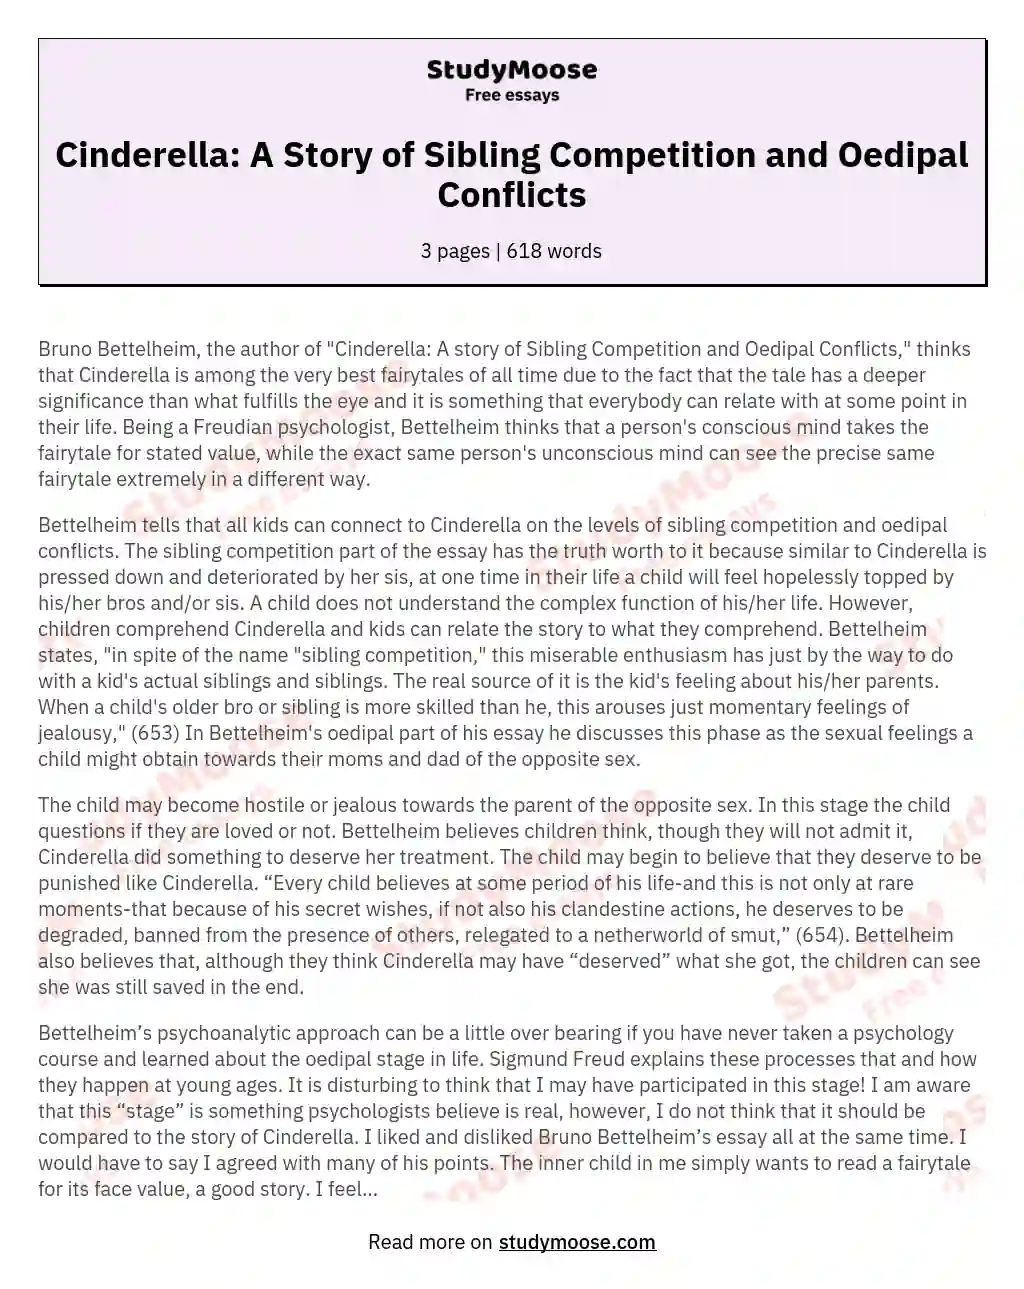 Cinderella: A Story of Sibling Competition and Oedipal Conflicts